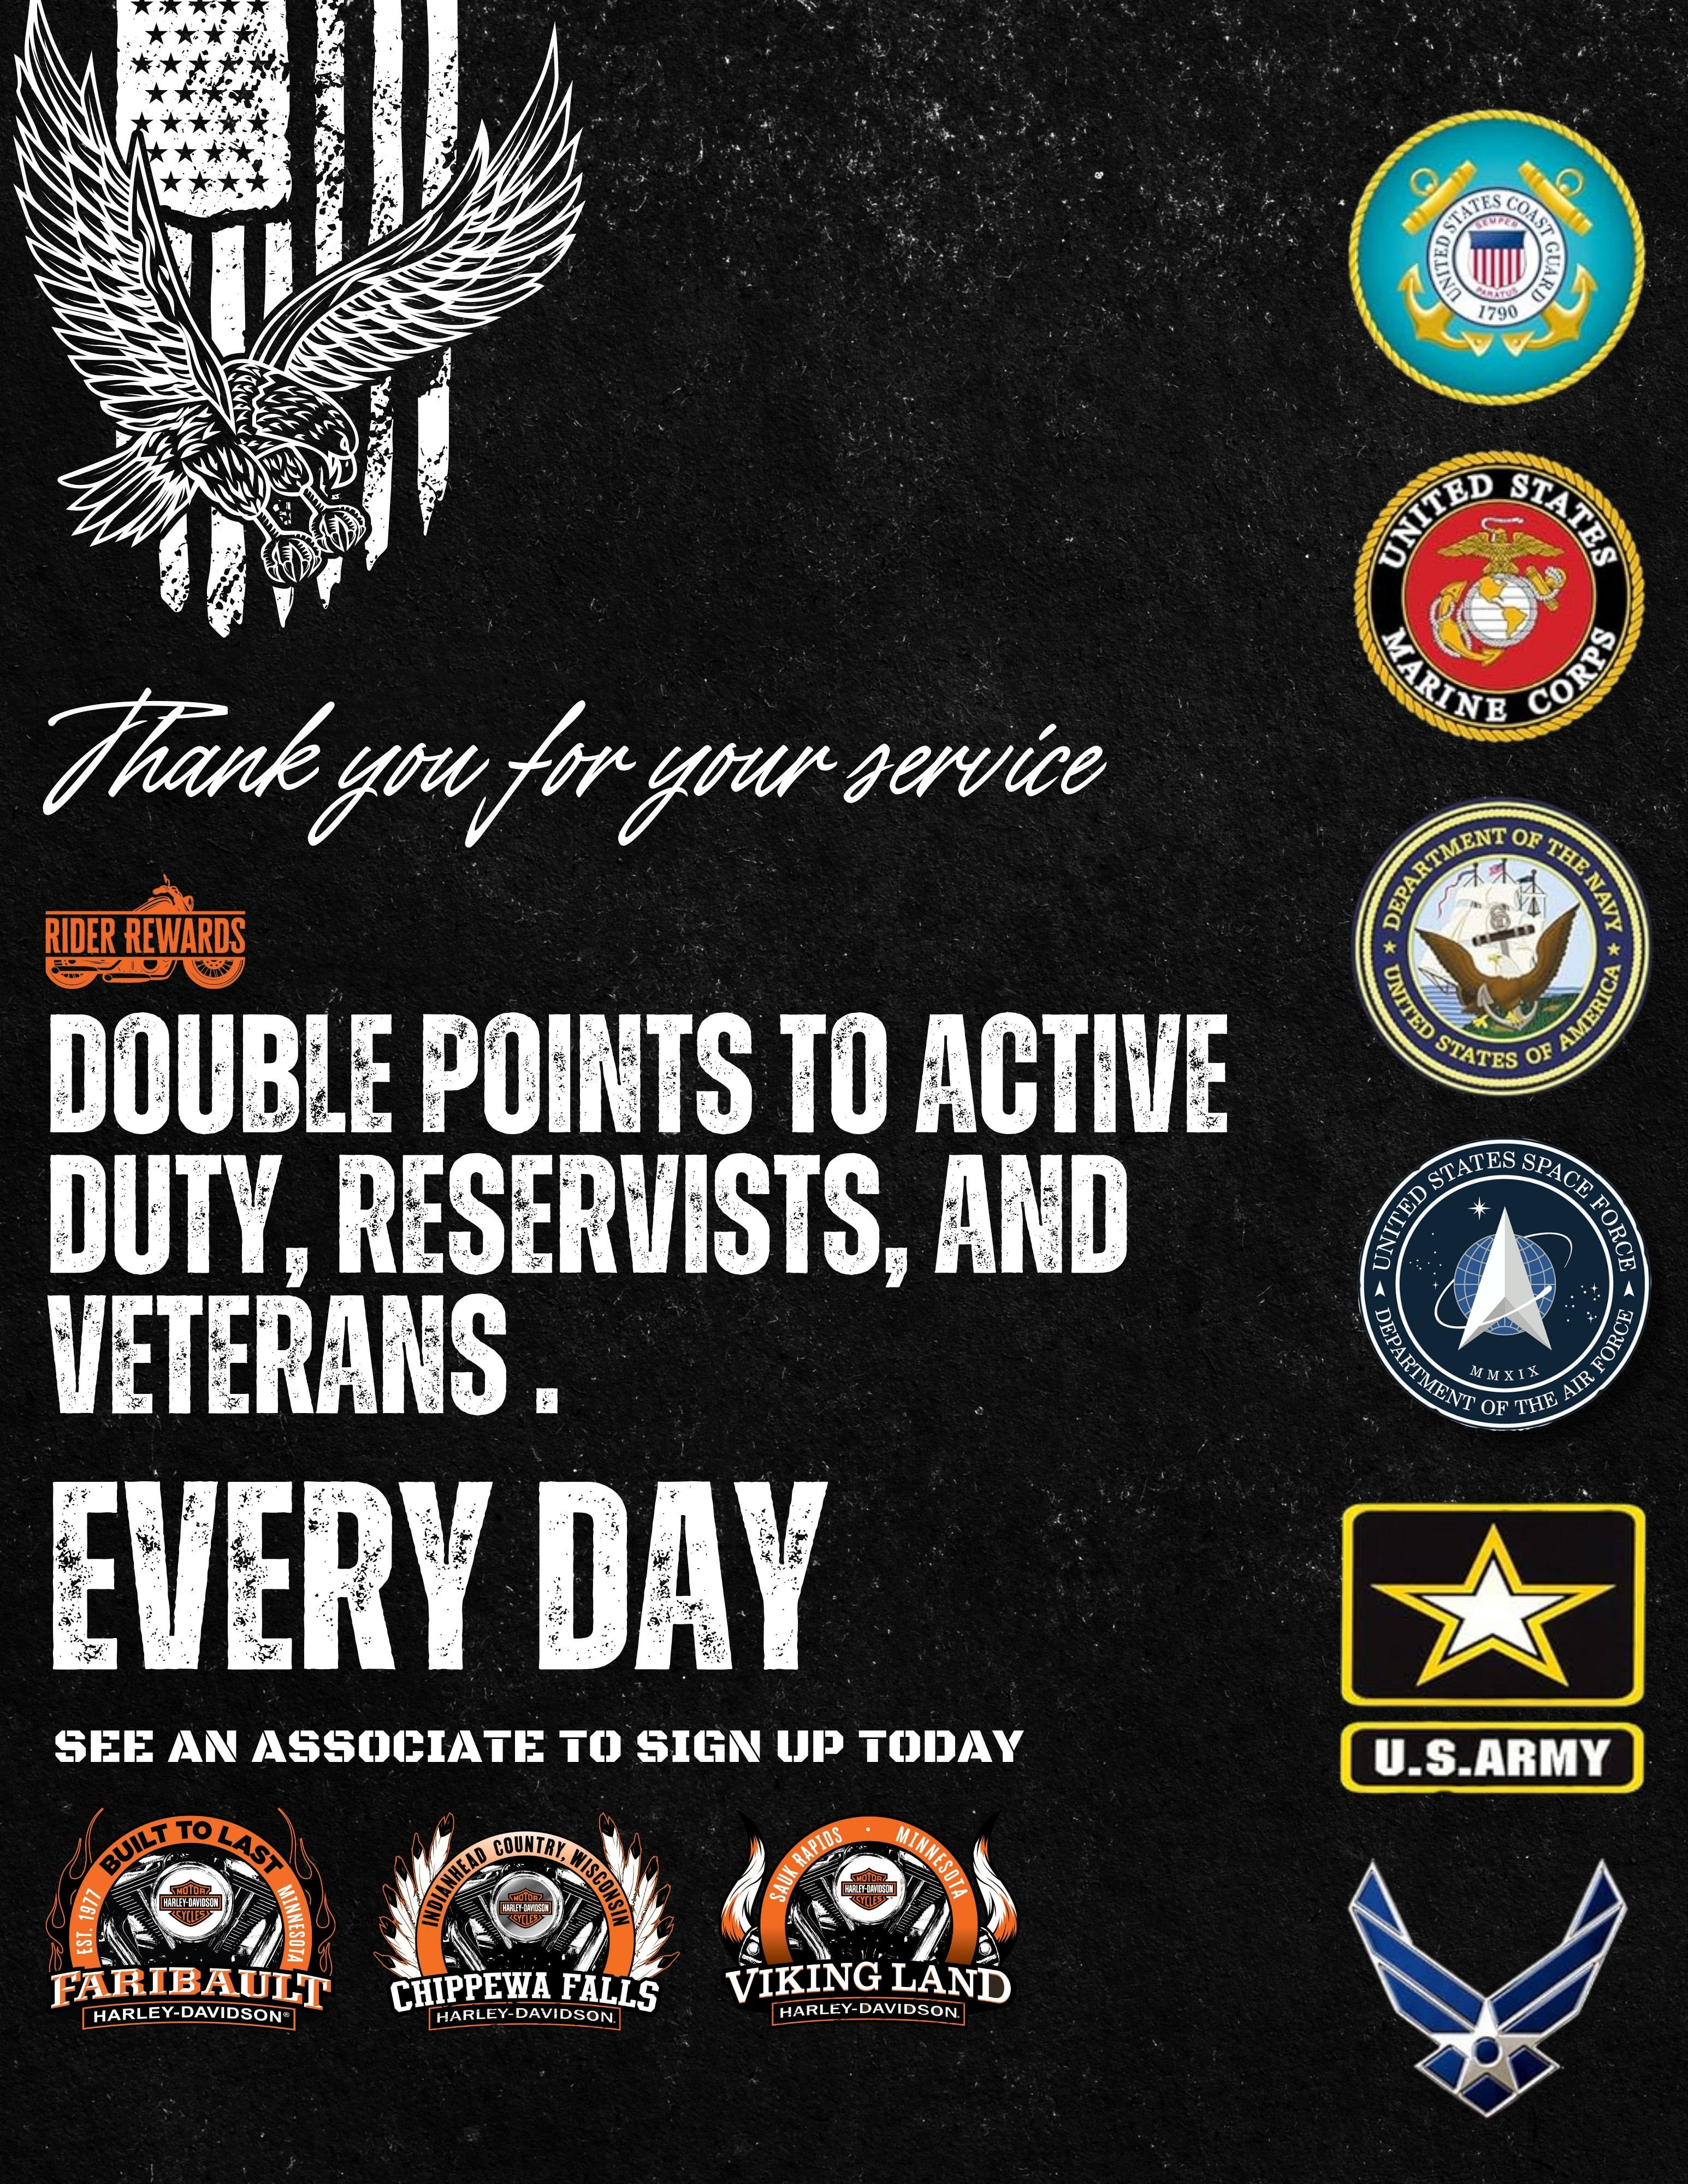 Double Points to all military personnel every day